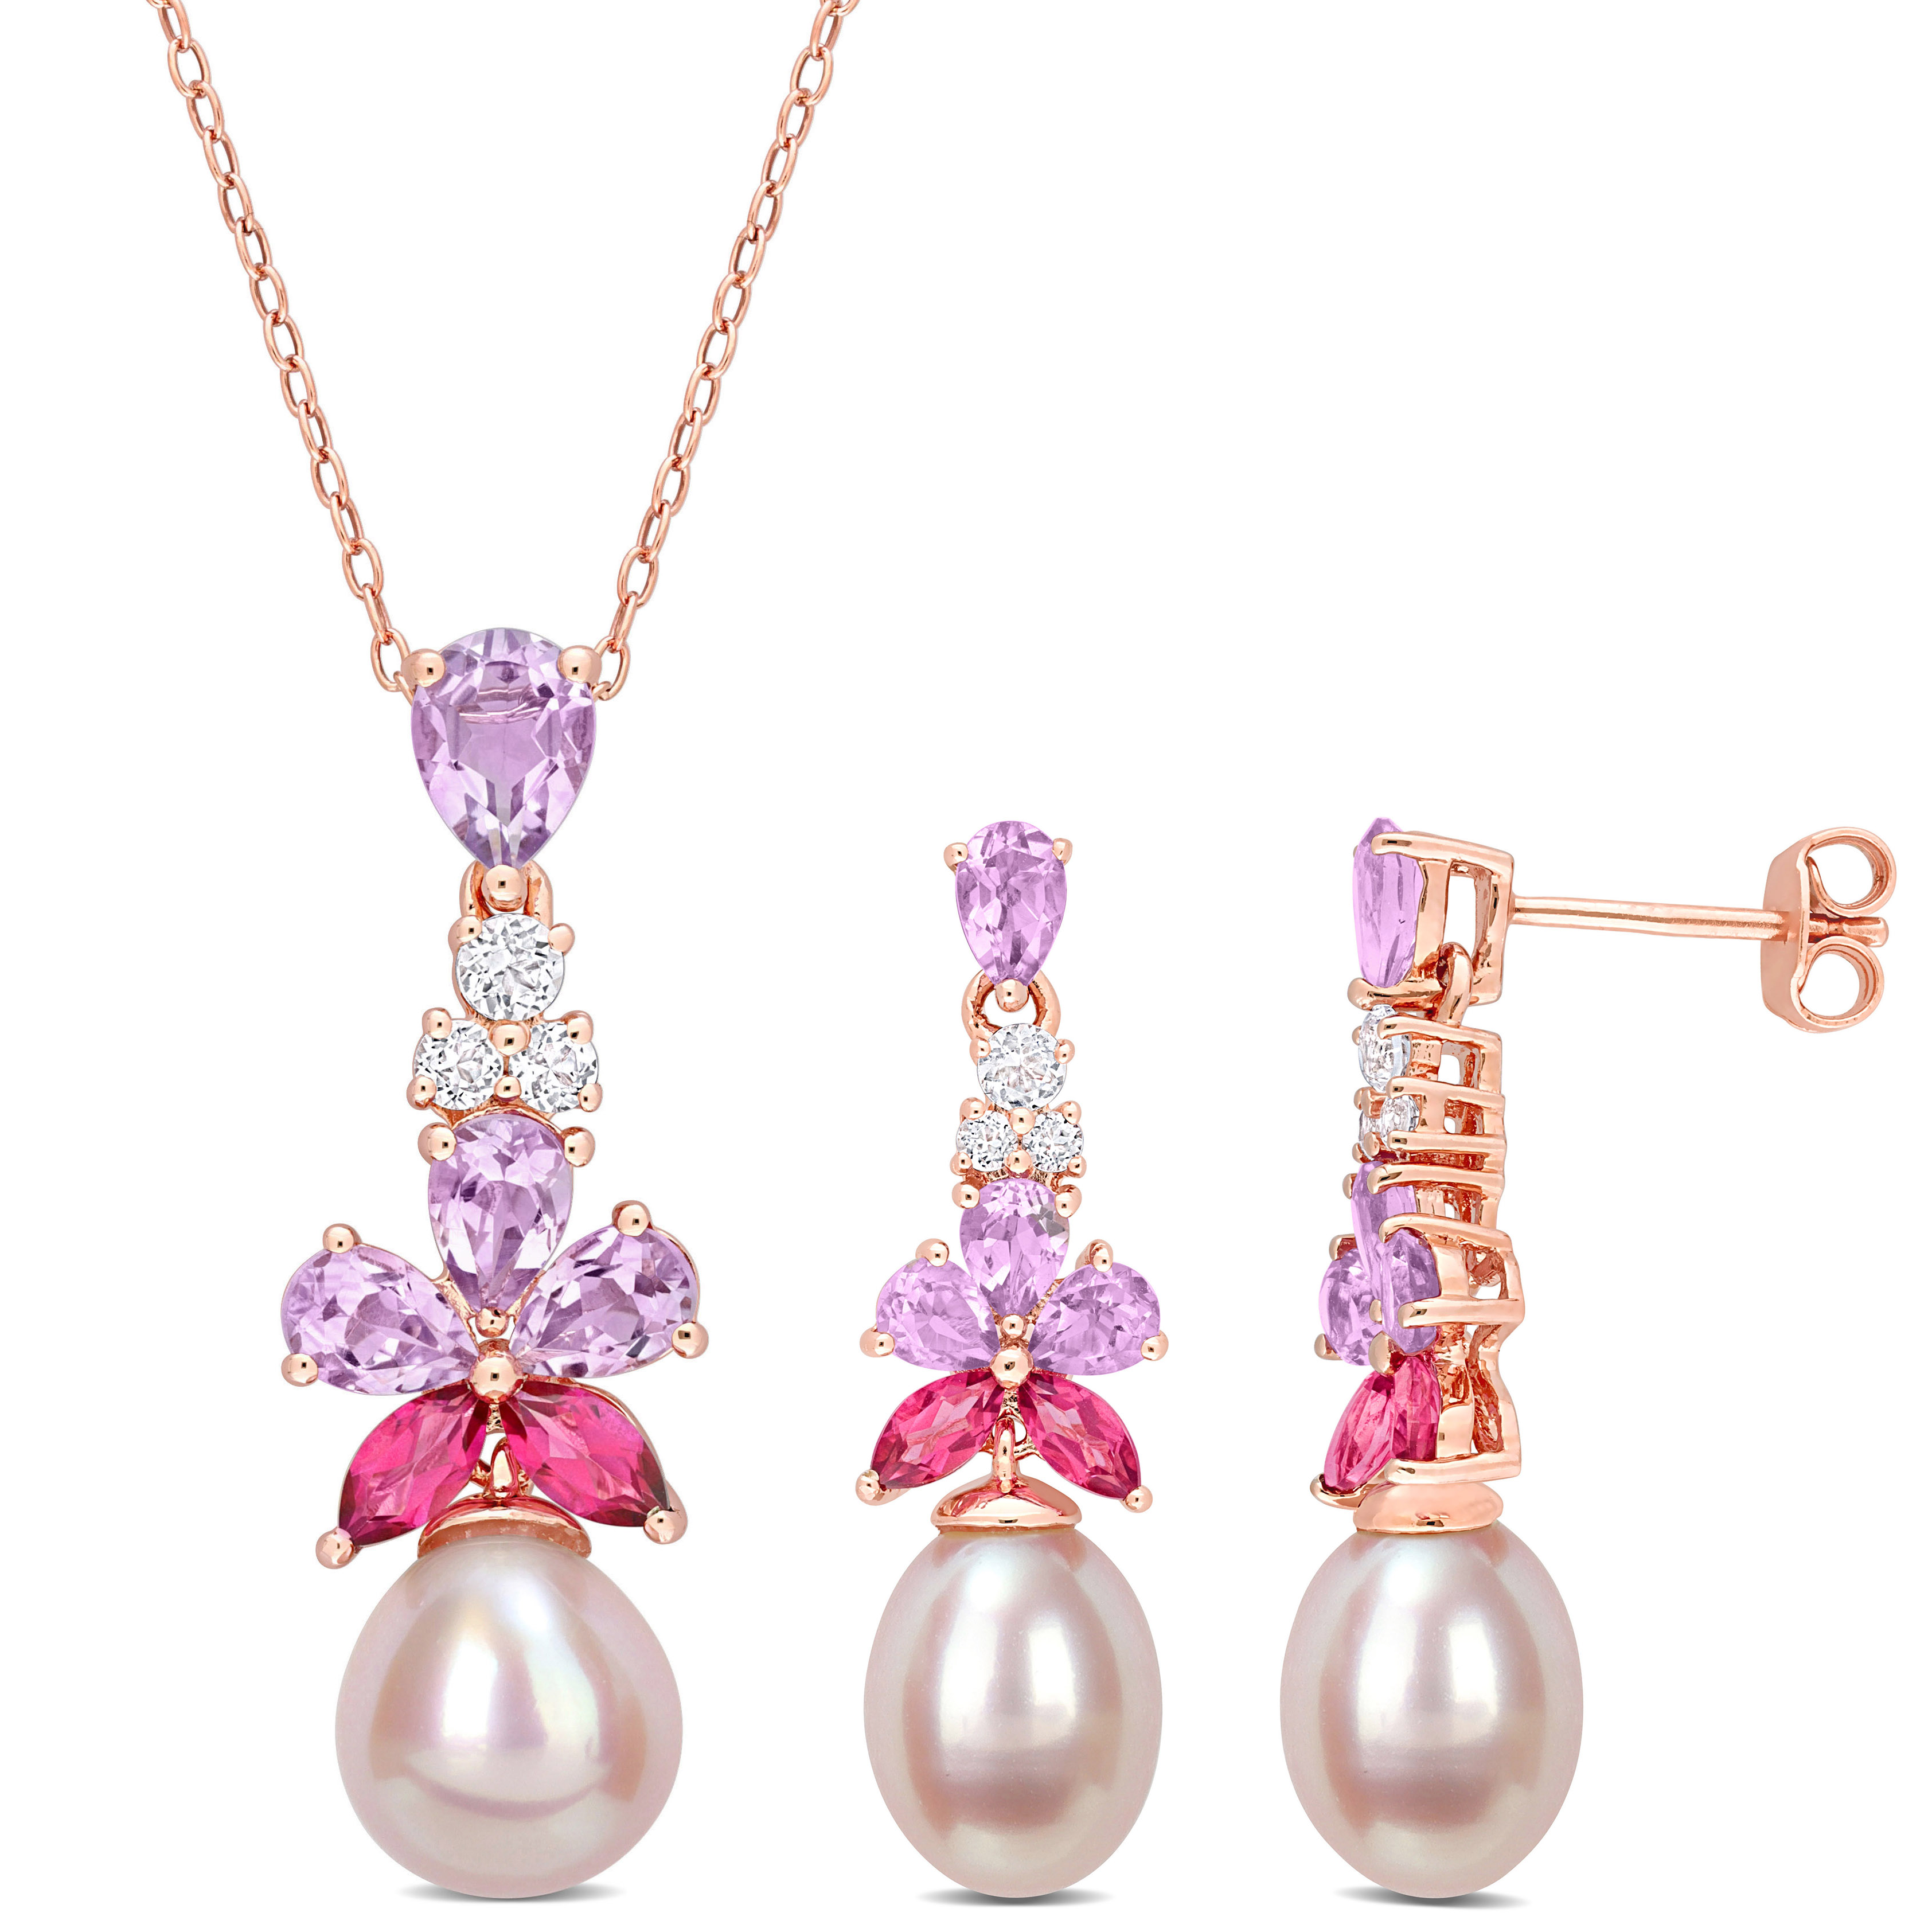 4 4/5 CT TGW Marquise-Cut Pink Topaz Pear-Cut Rose de France White Topaz and Pink Cultured Freshwater Rice Pearl 2-Piece Necklace and Earrings Set in Rose Plated Sterling Silver